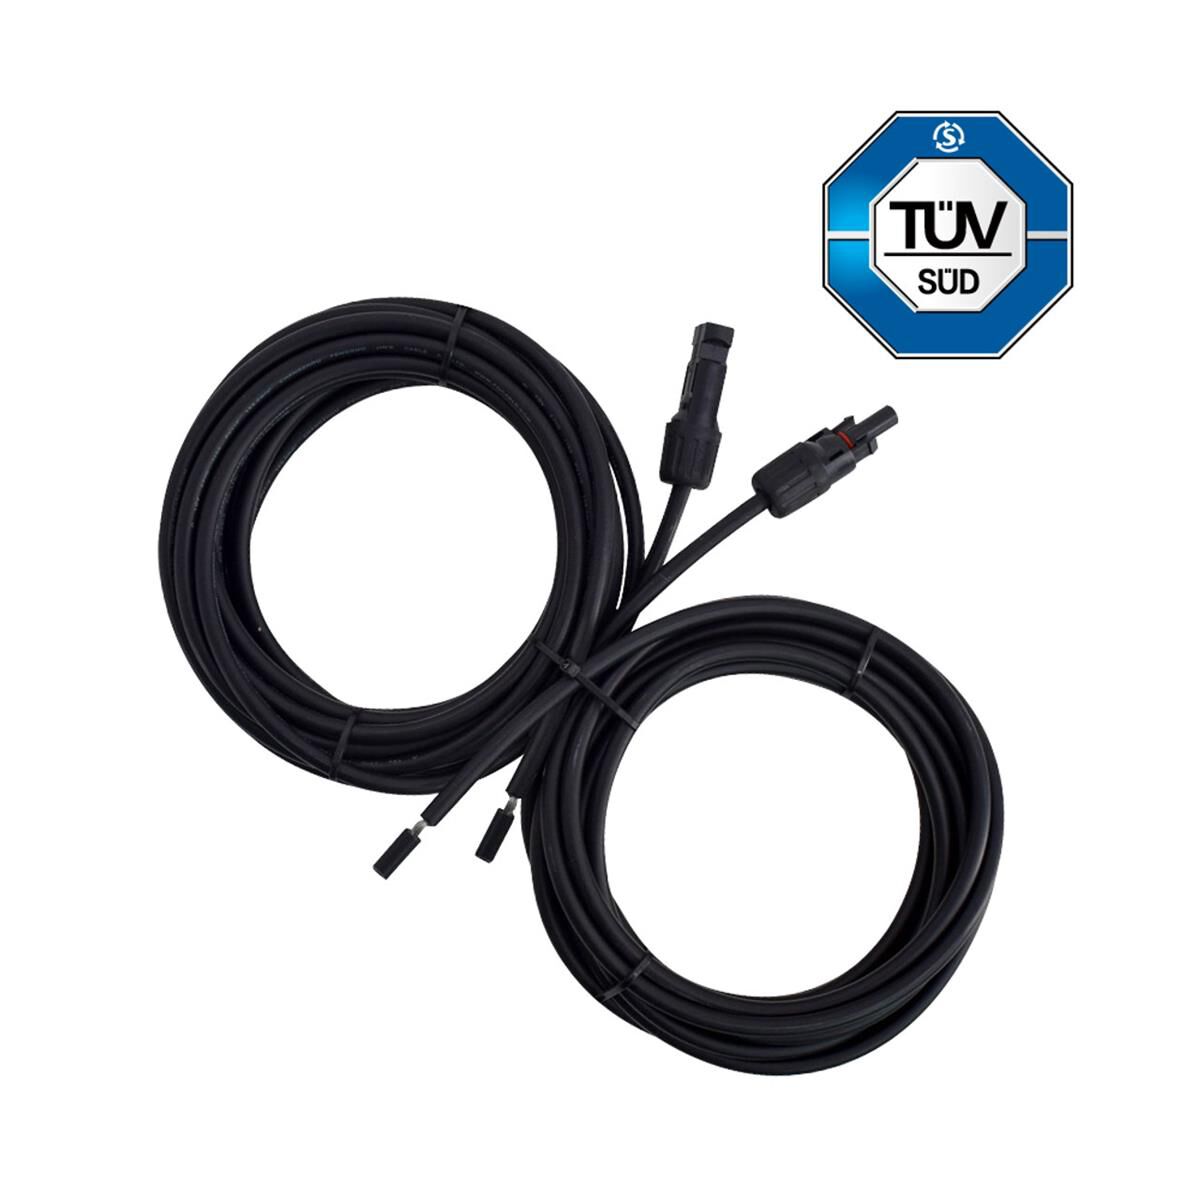 10FT SOLAR ADAPTOR KIT CABLES 10AWG CONNECTING SOLAR PANEL TO CONTROLLER, , scaau_hi-res